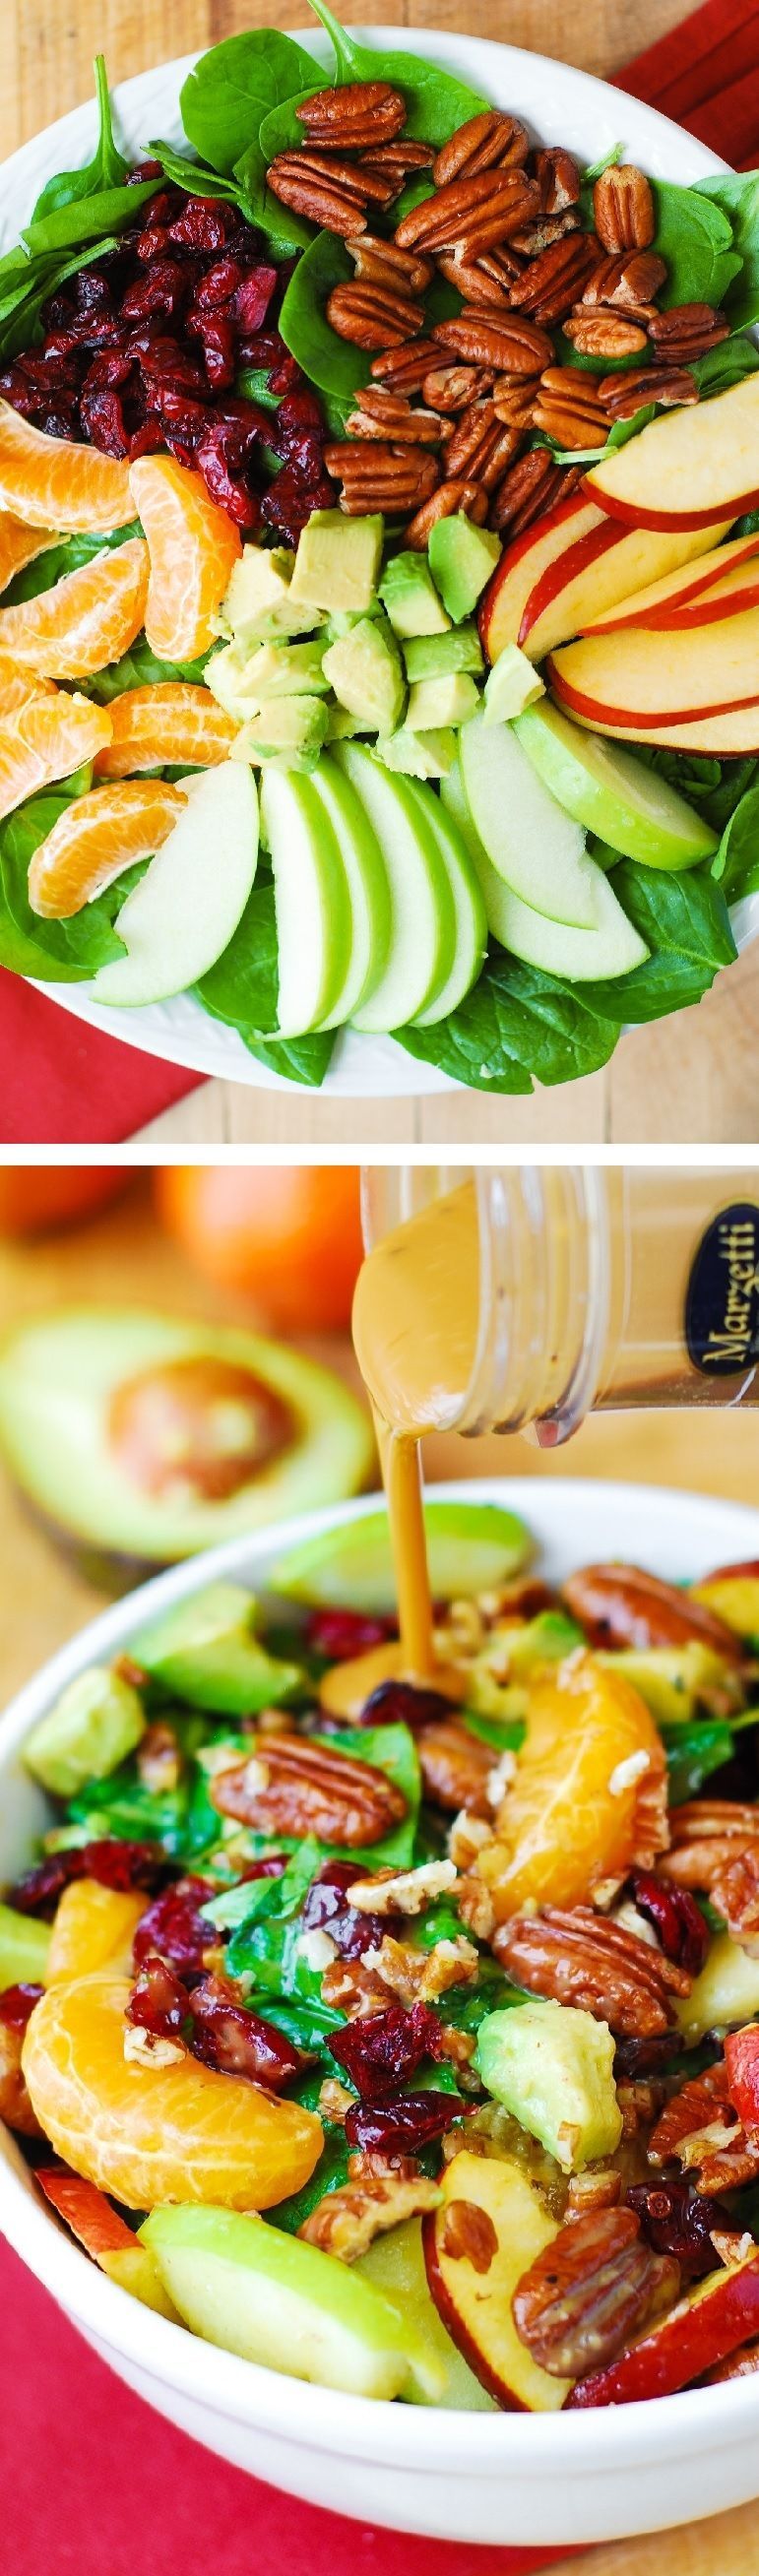 Apple Cranberry Spinach Salad with Pecans, Avocados – healthy, vegetarian, gluten free recipe.